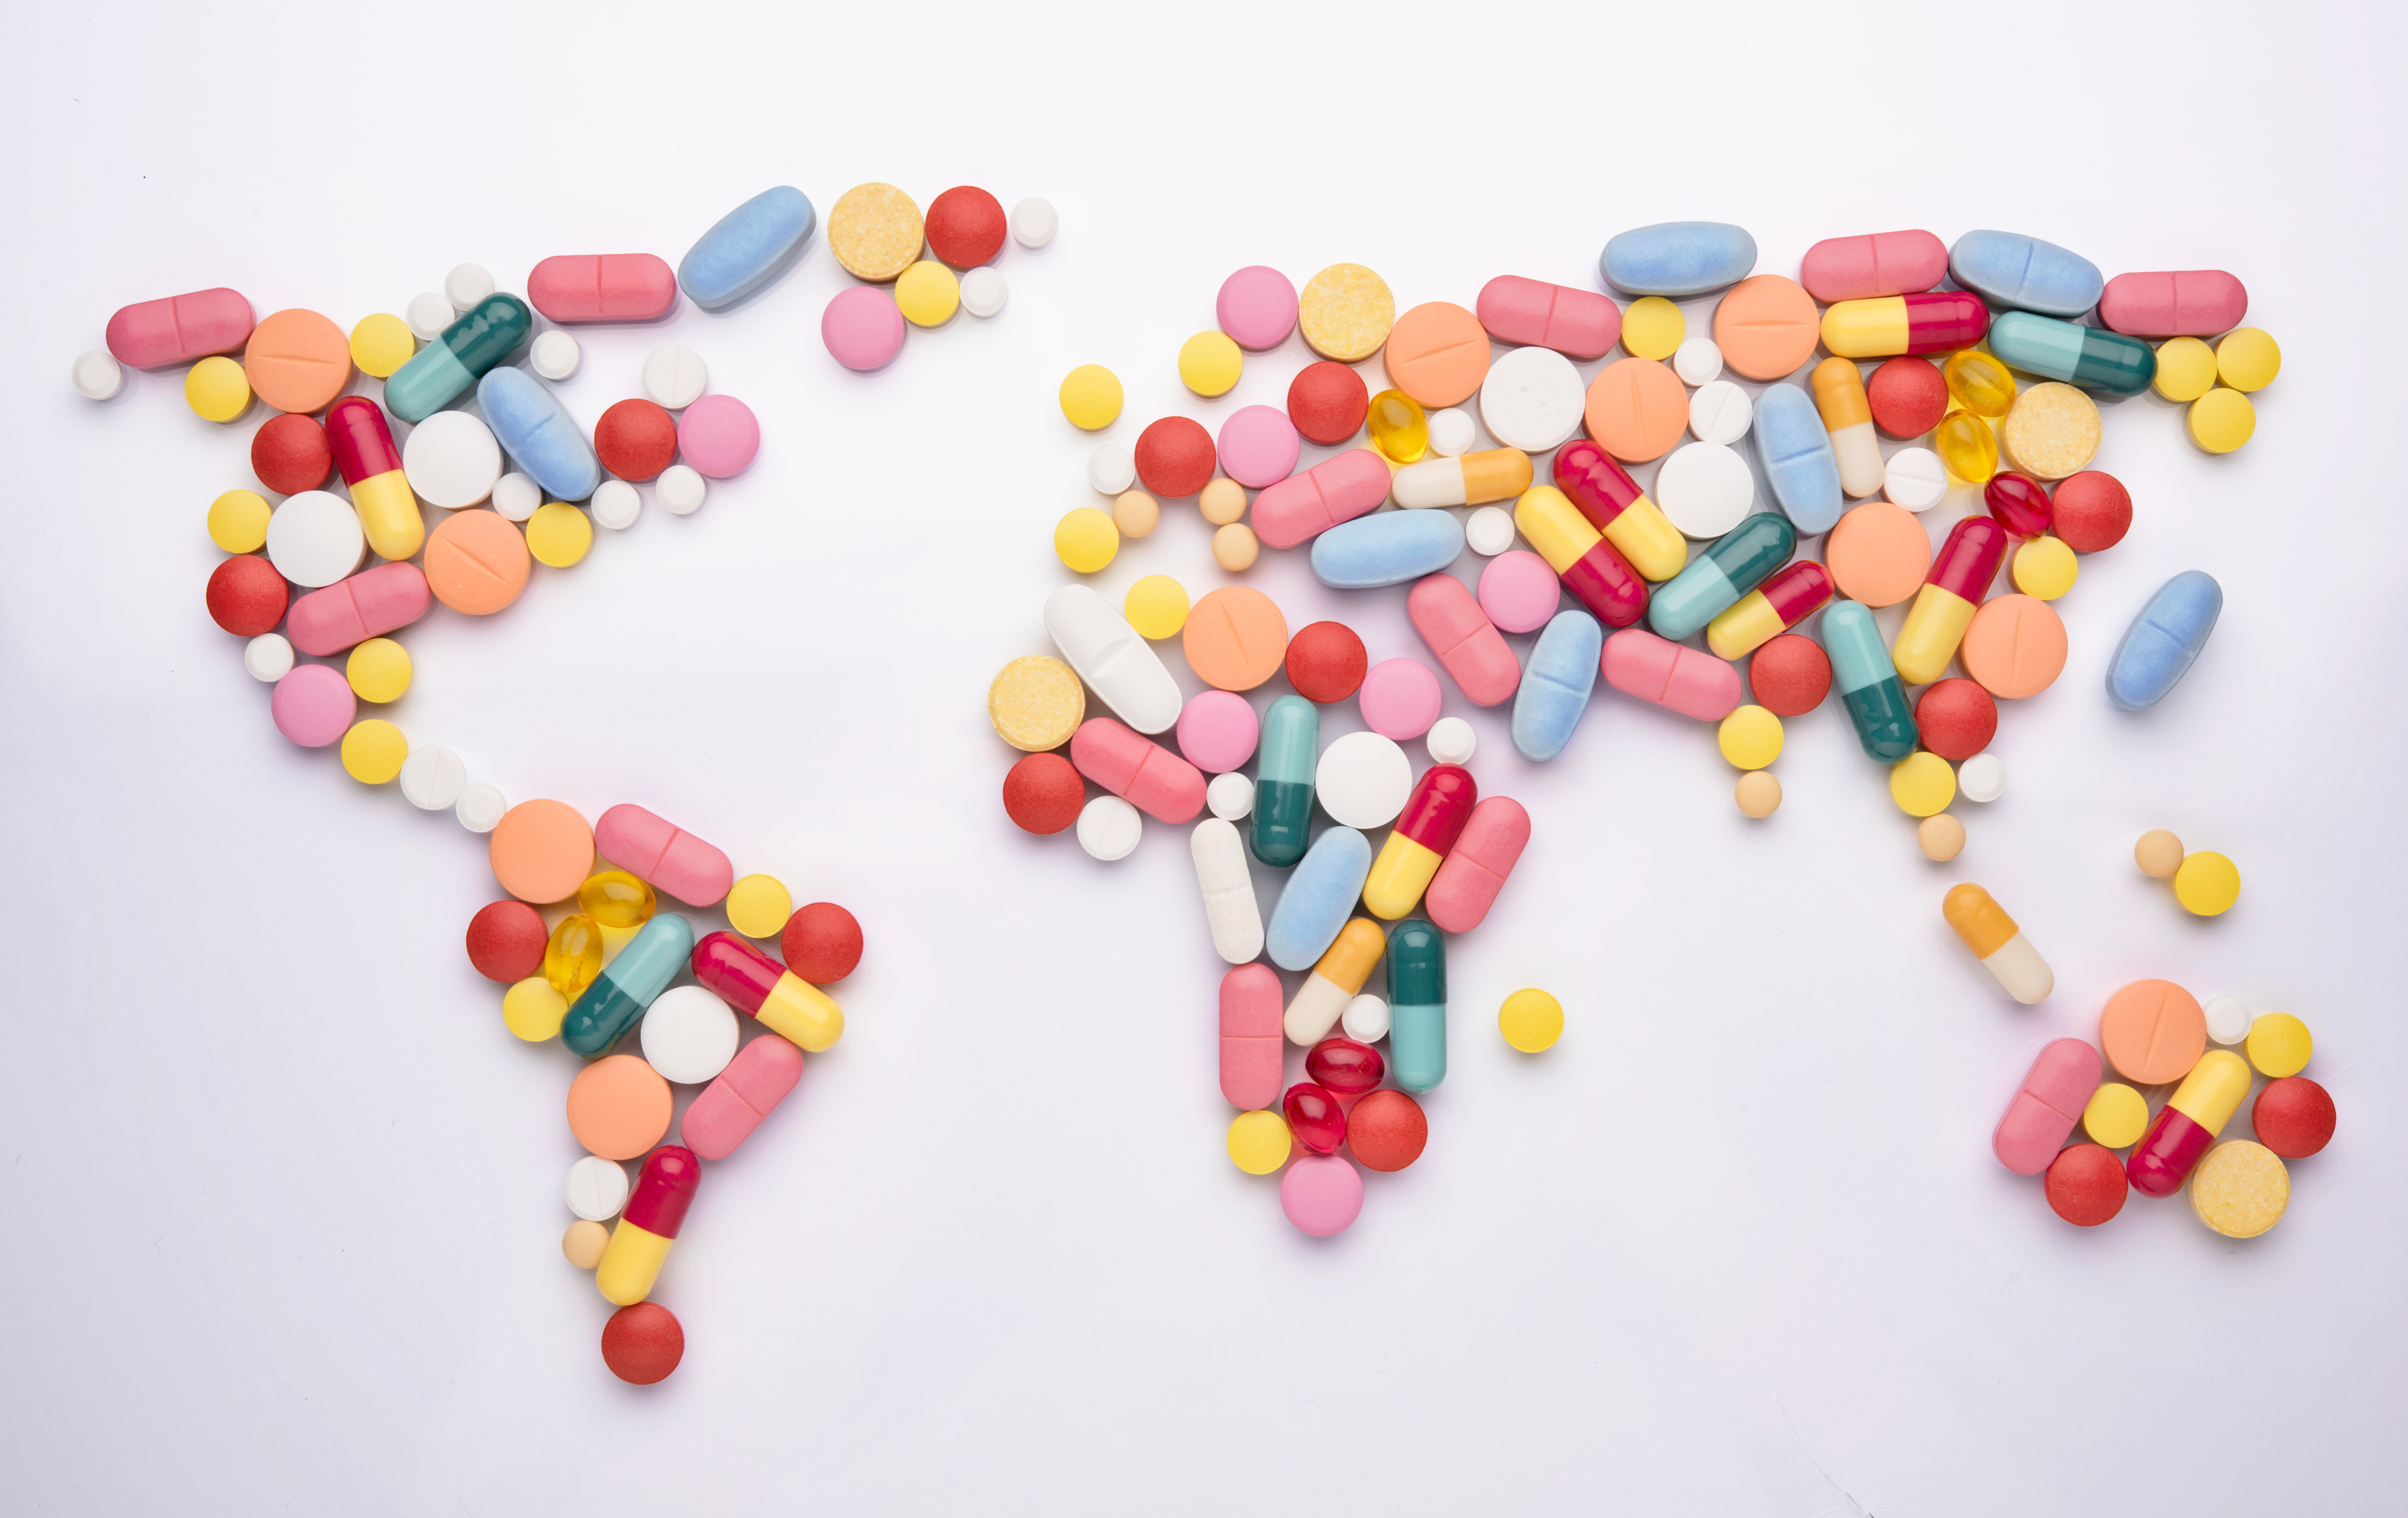 Event report: World Patient Safety Day Symposium Webinar – Medication Without Harm (15 September 2022)